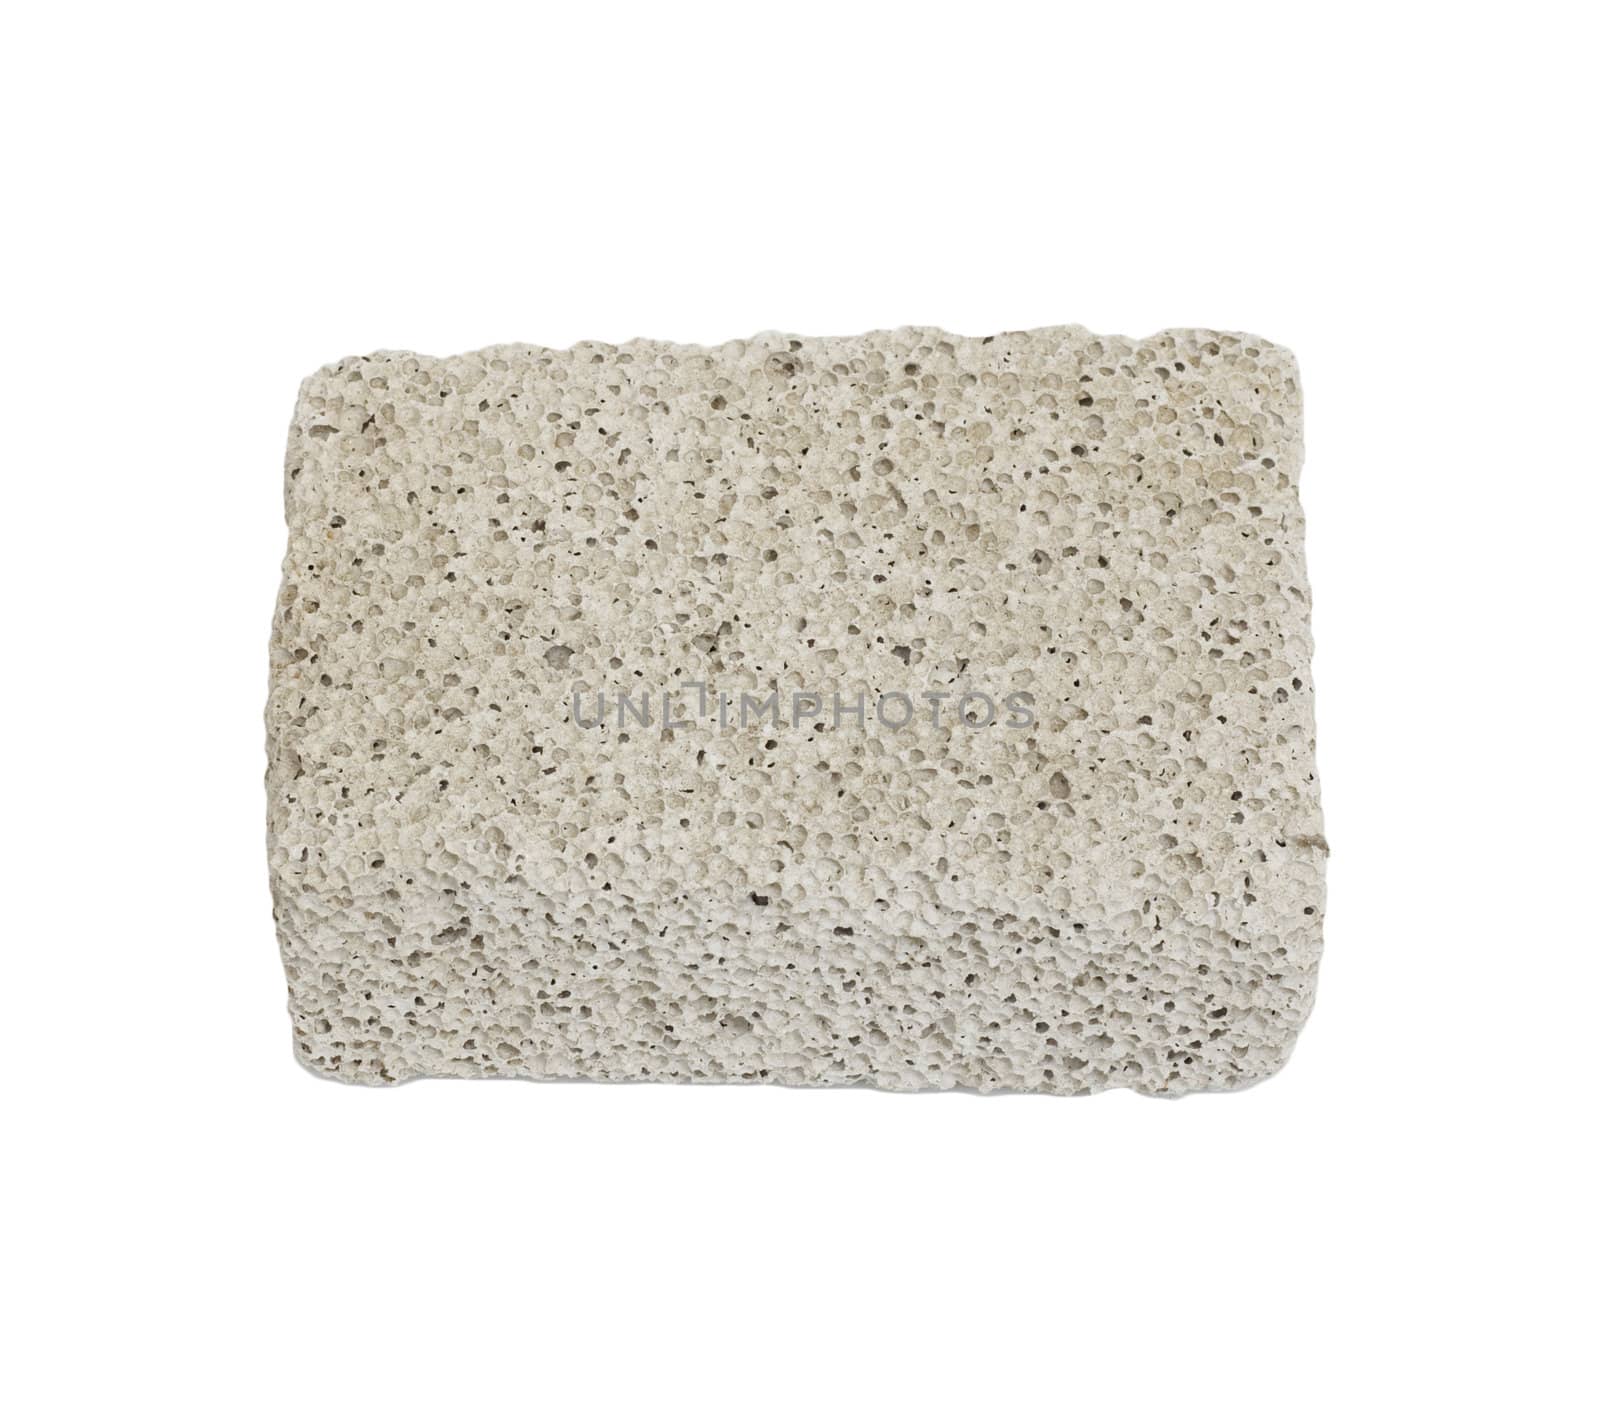 Pumice Stone Detail Isolated on White Background  by schankz